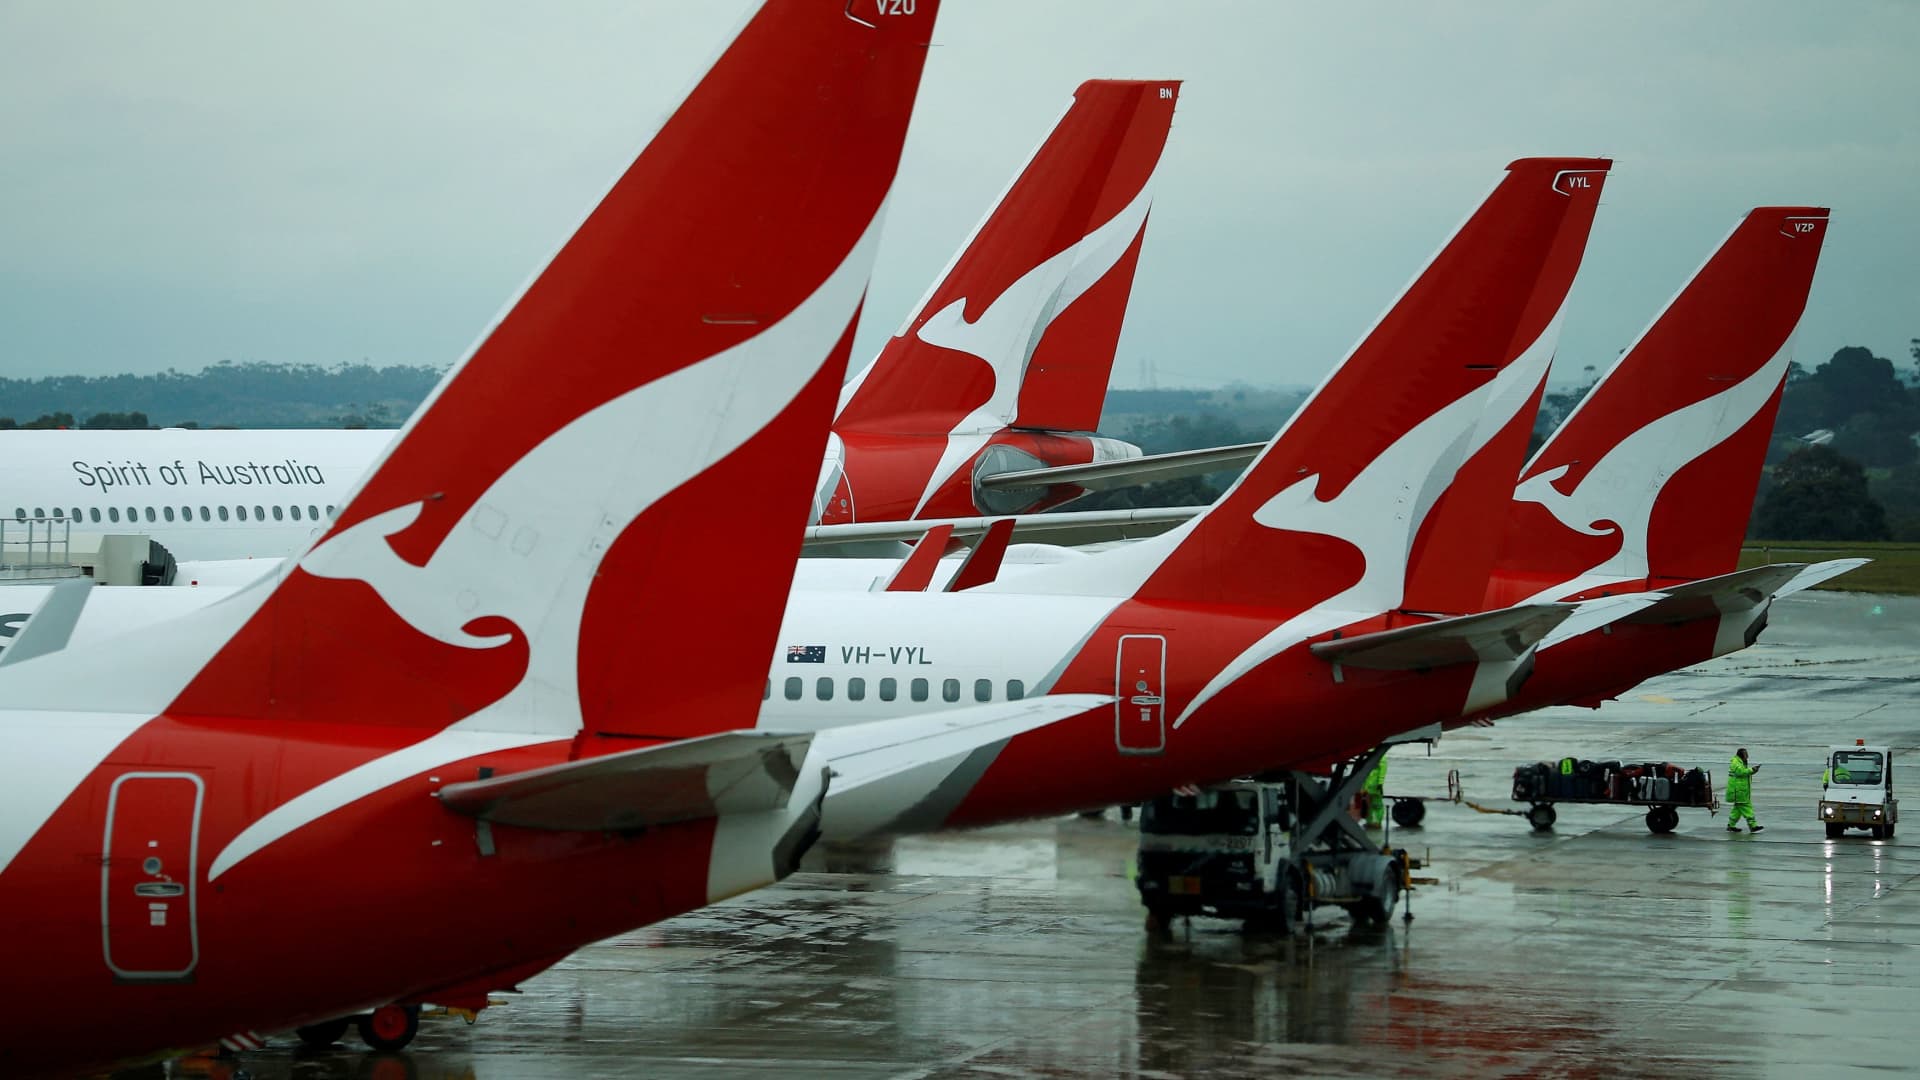 ‘The system is rusty’: Qantas CEO defends industry as airlines cancel thousands of flights